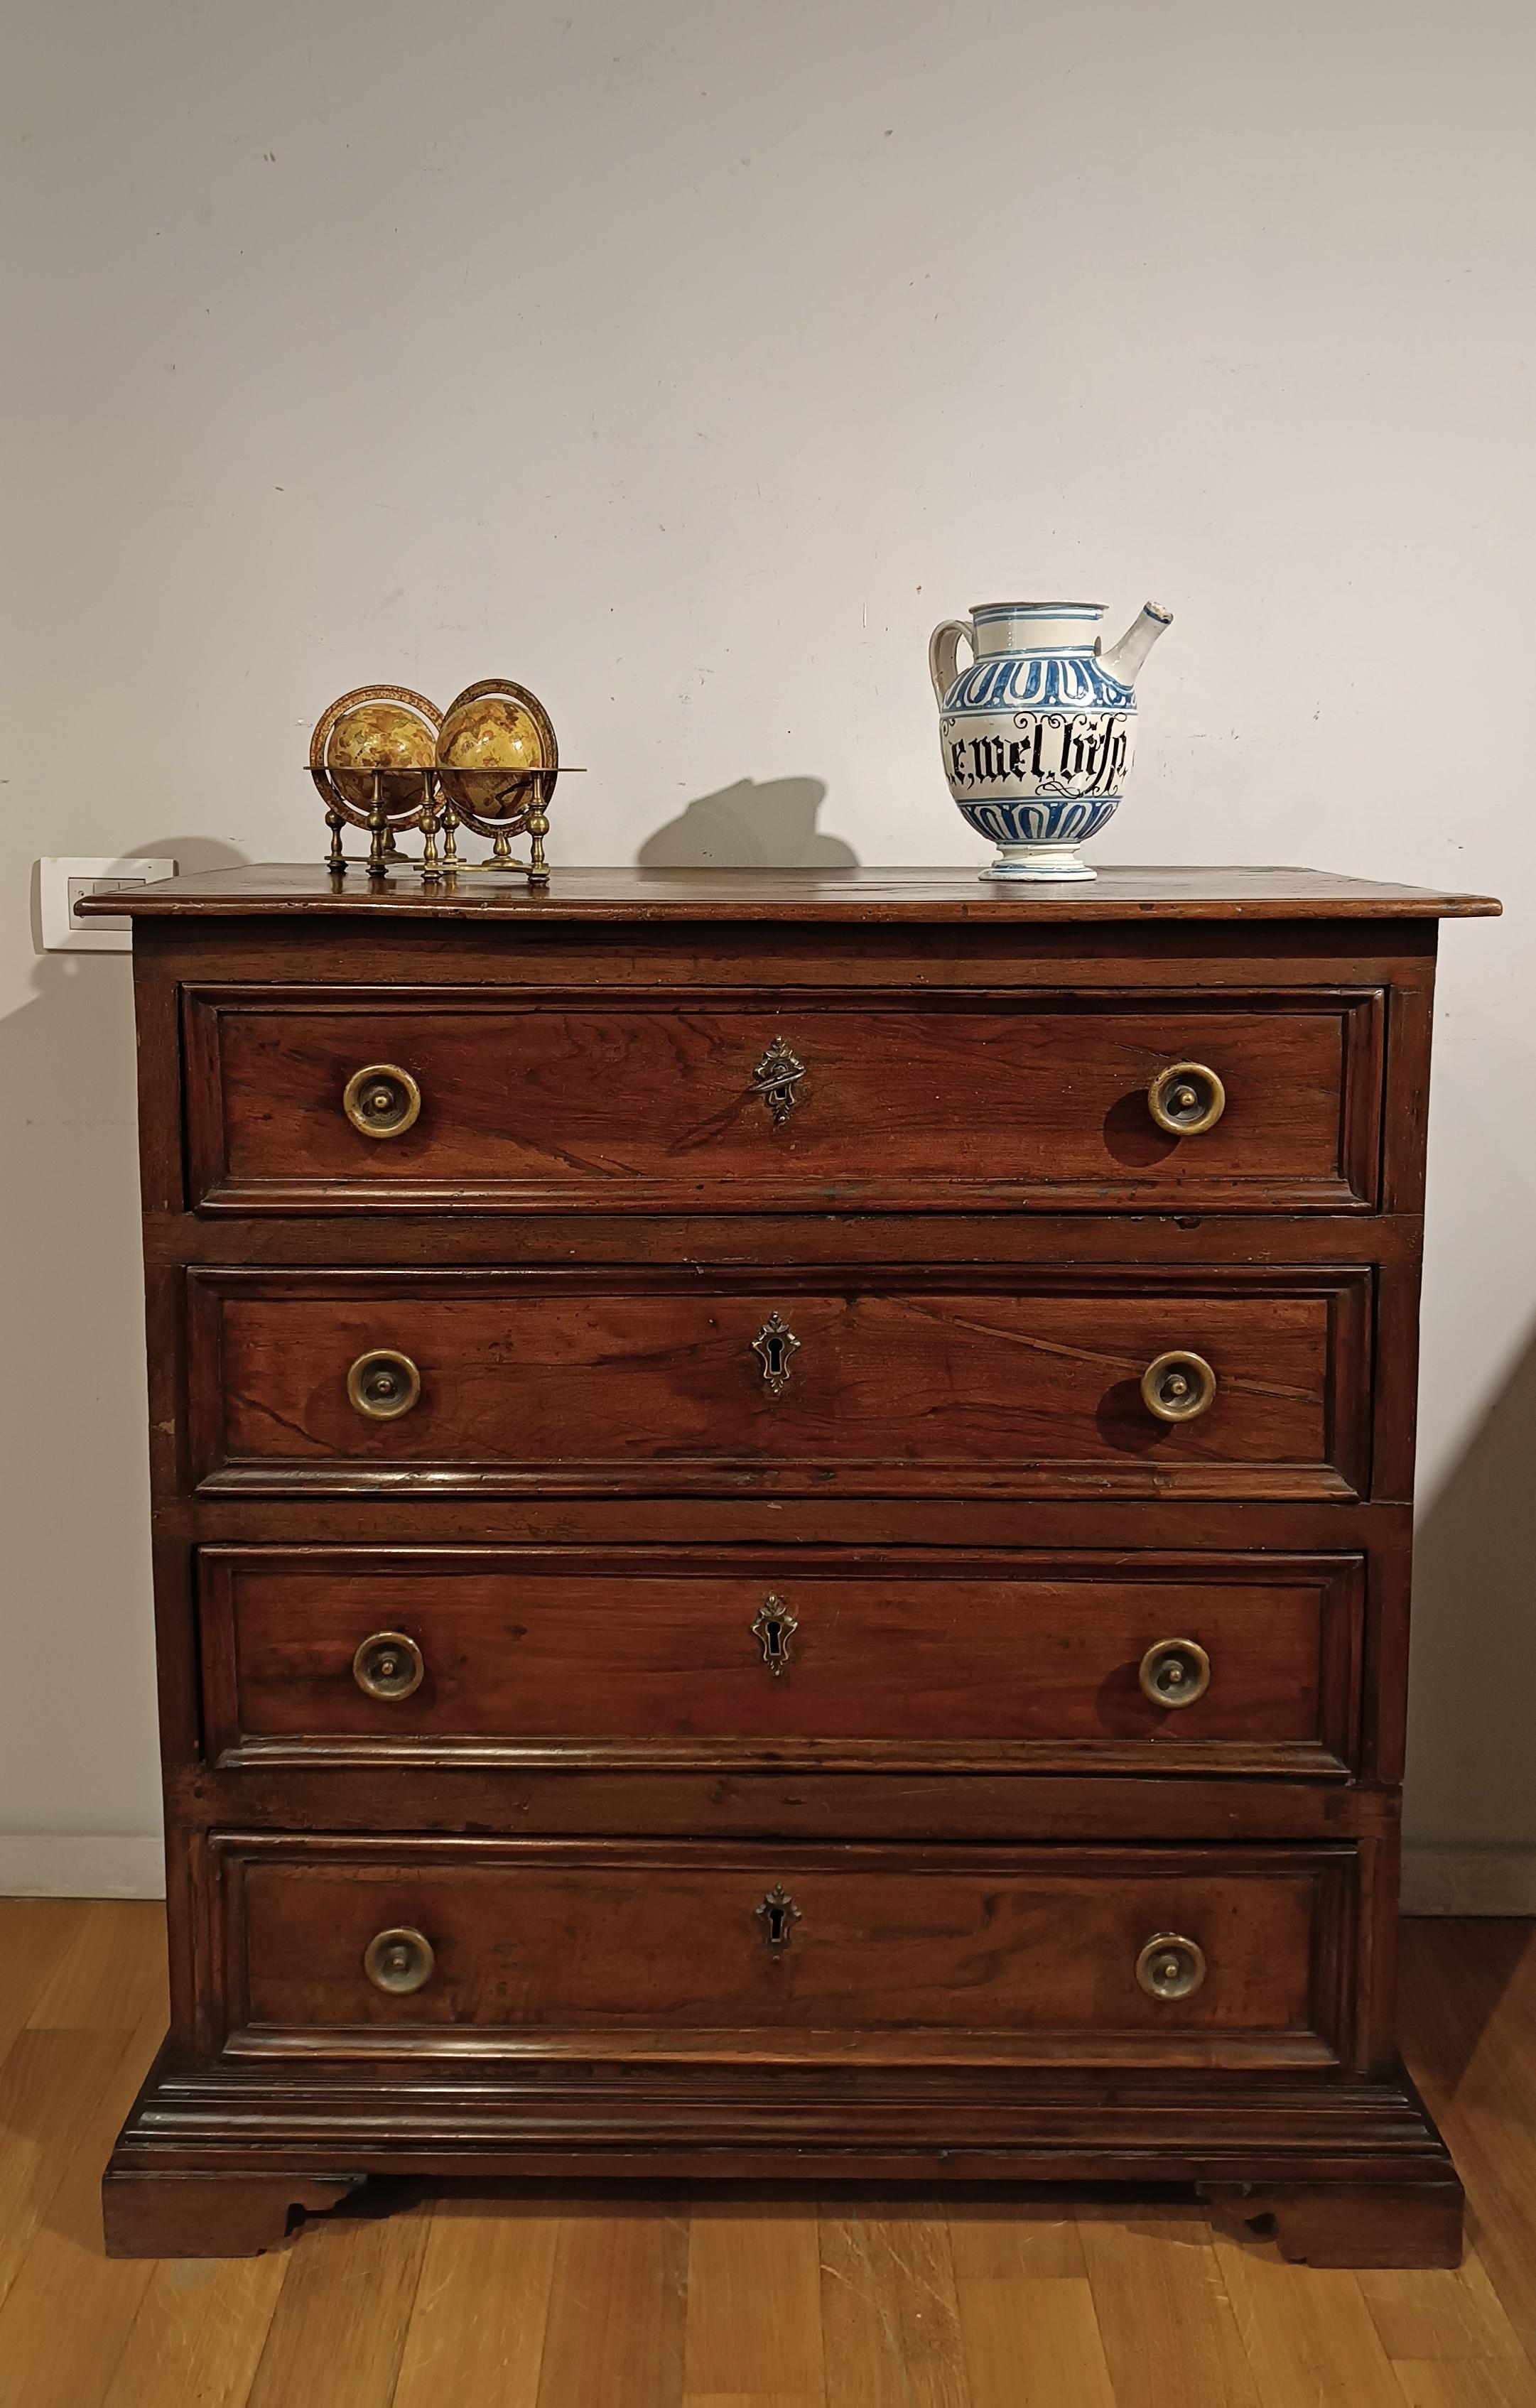 17th CENTURY CHEST OF DRAWERS IN SOLID AND VENEREED WALNUT 3